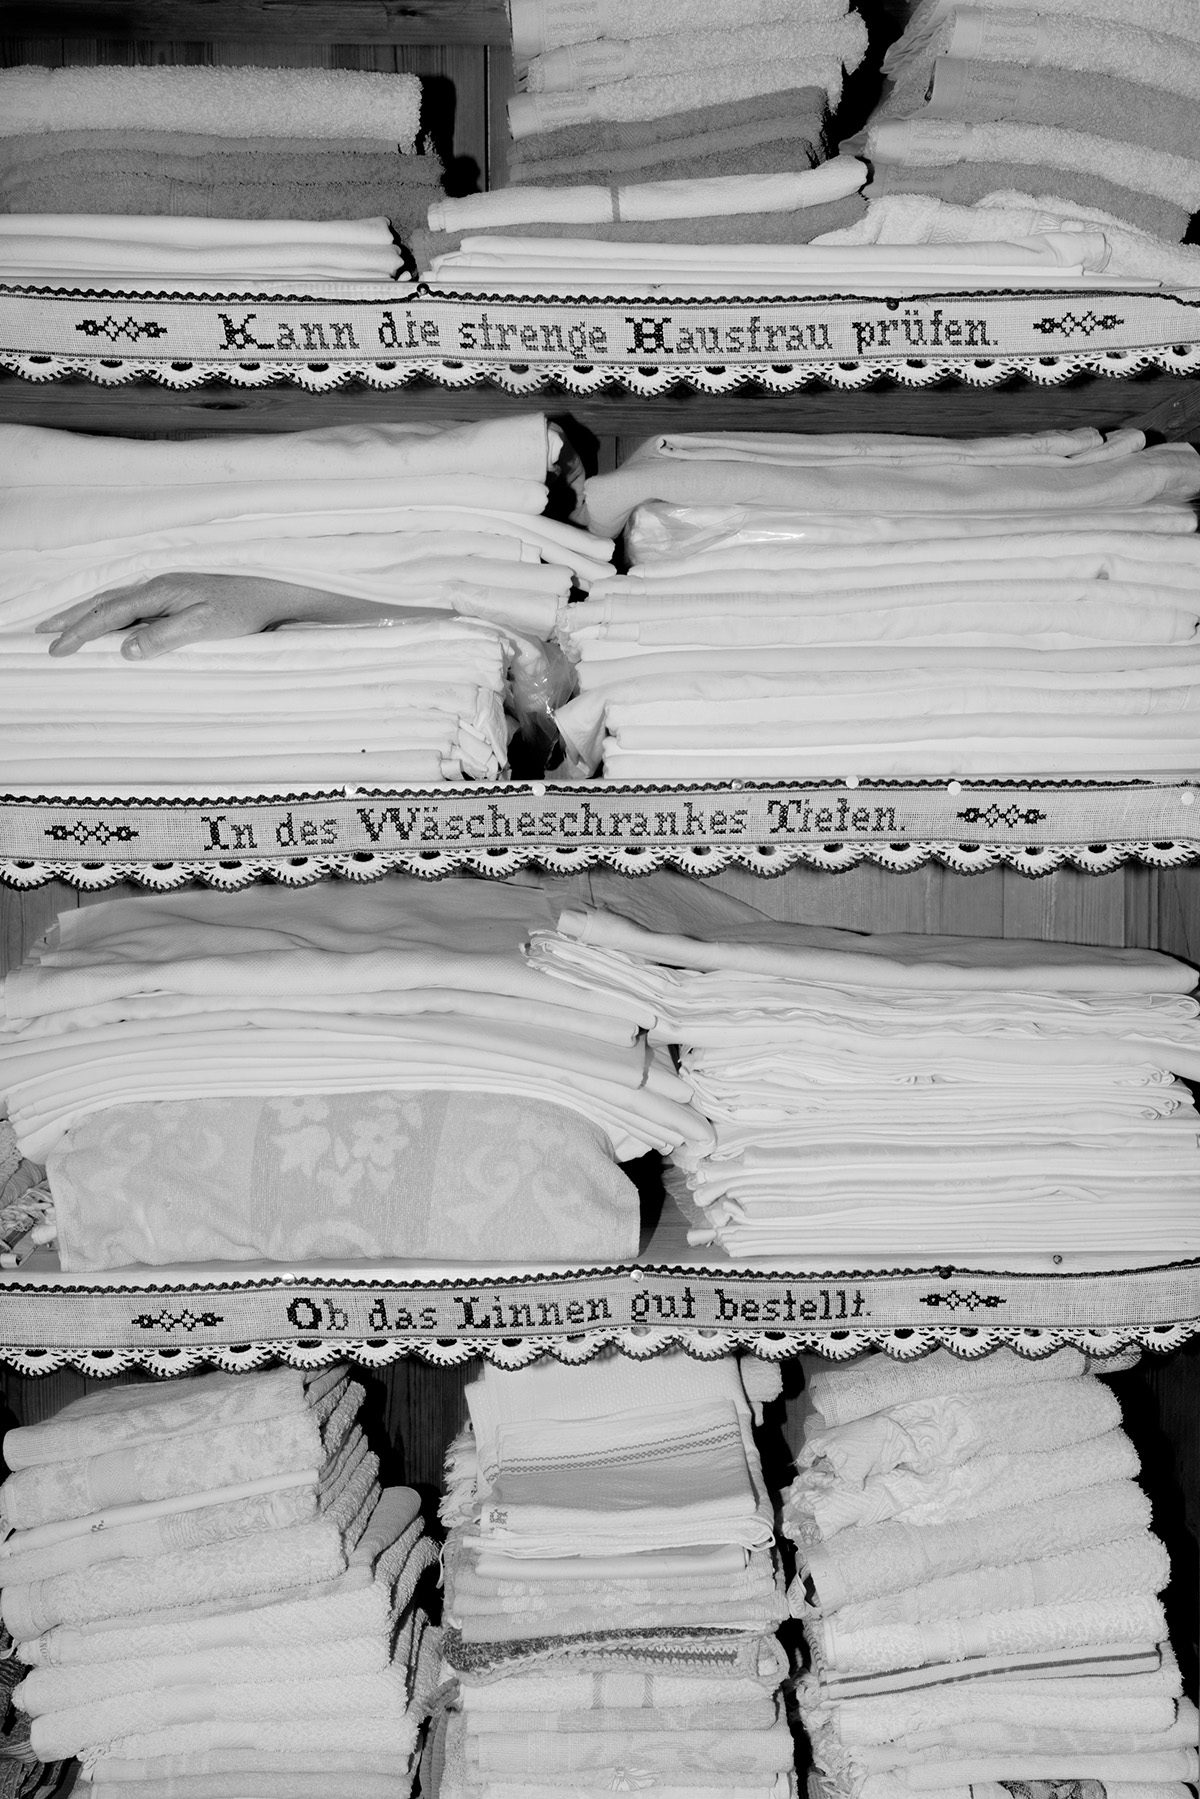 Black and white photograph from Plexus by Elena Helfrecht showing piles of linens, which have been folded on shelves that are edged with German phrases. A hand is nestled between the piles